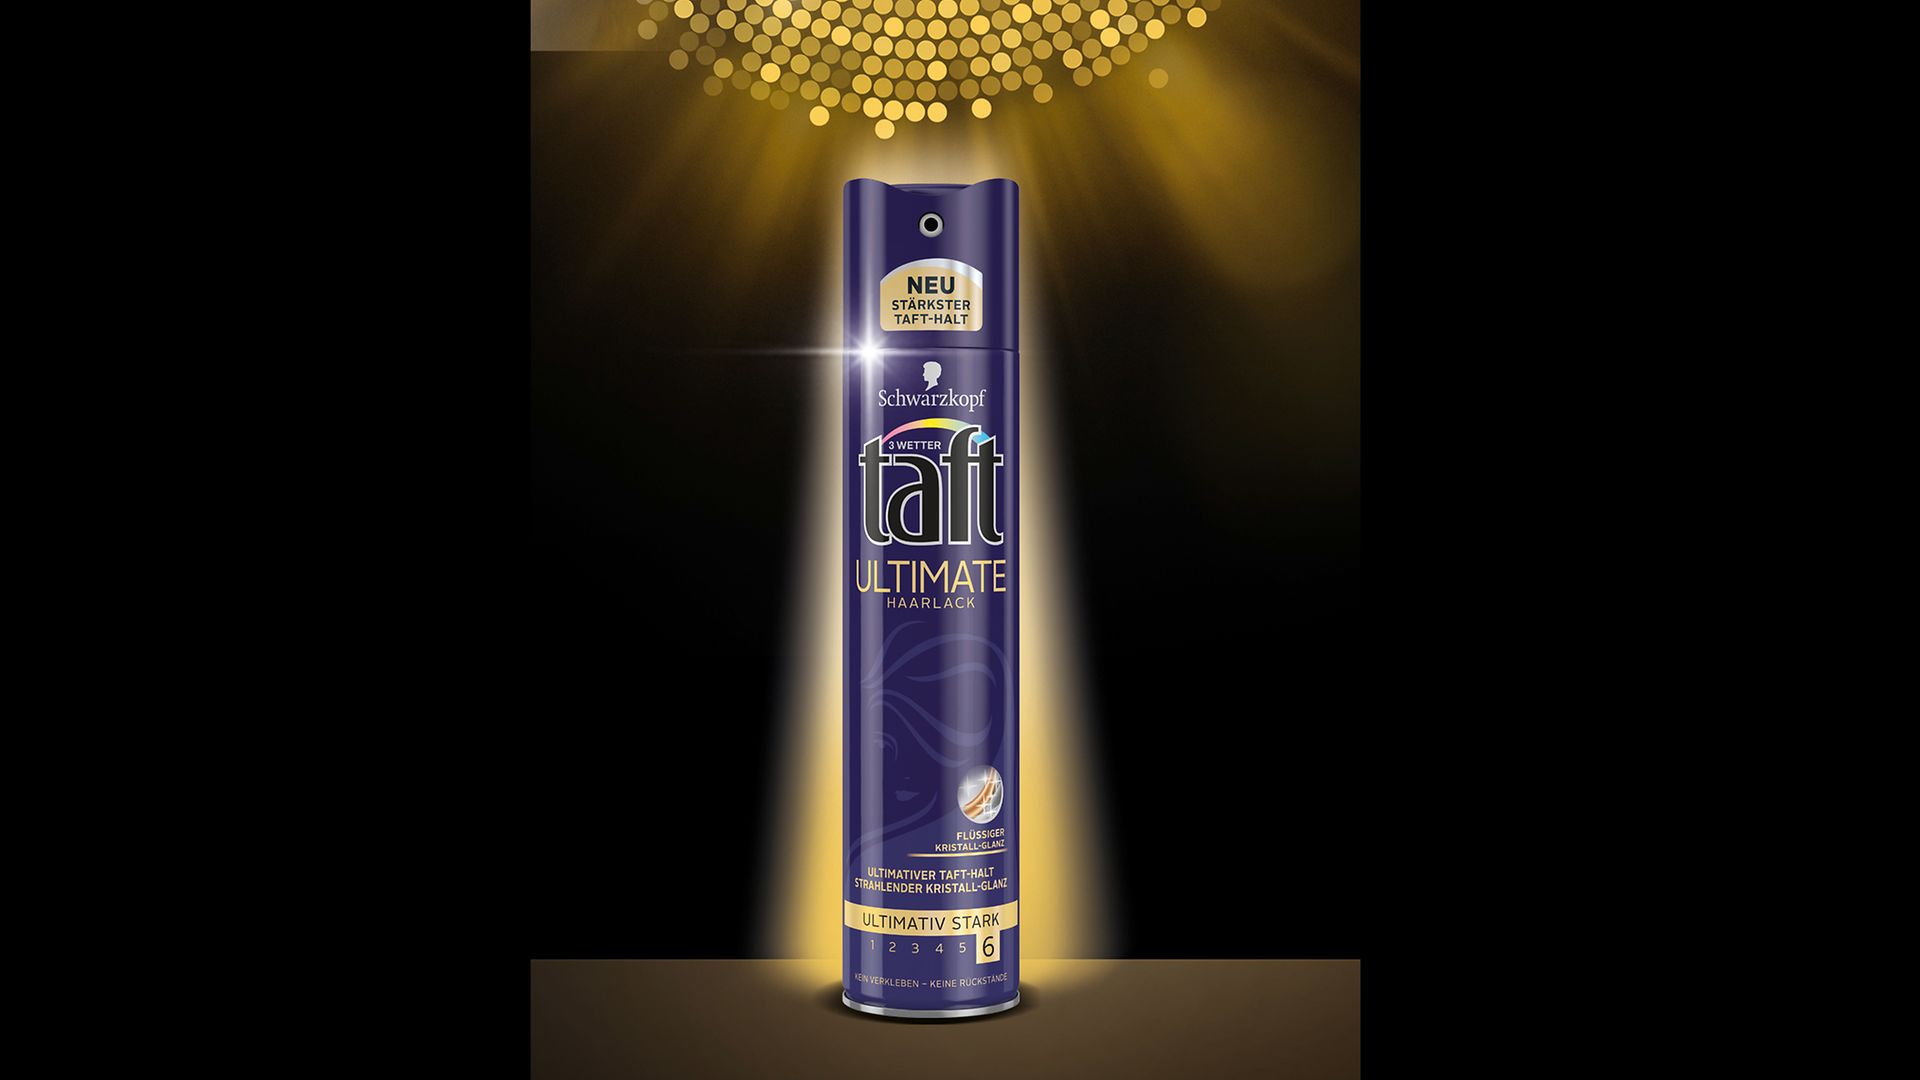 The brand “Taft” celebrated its 60th anniversary